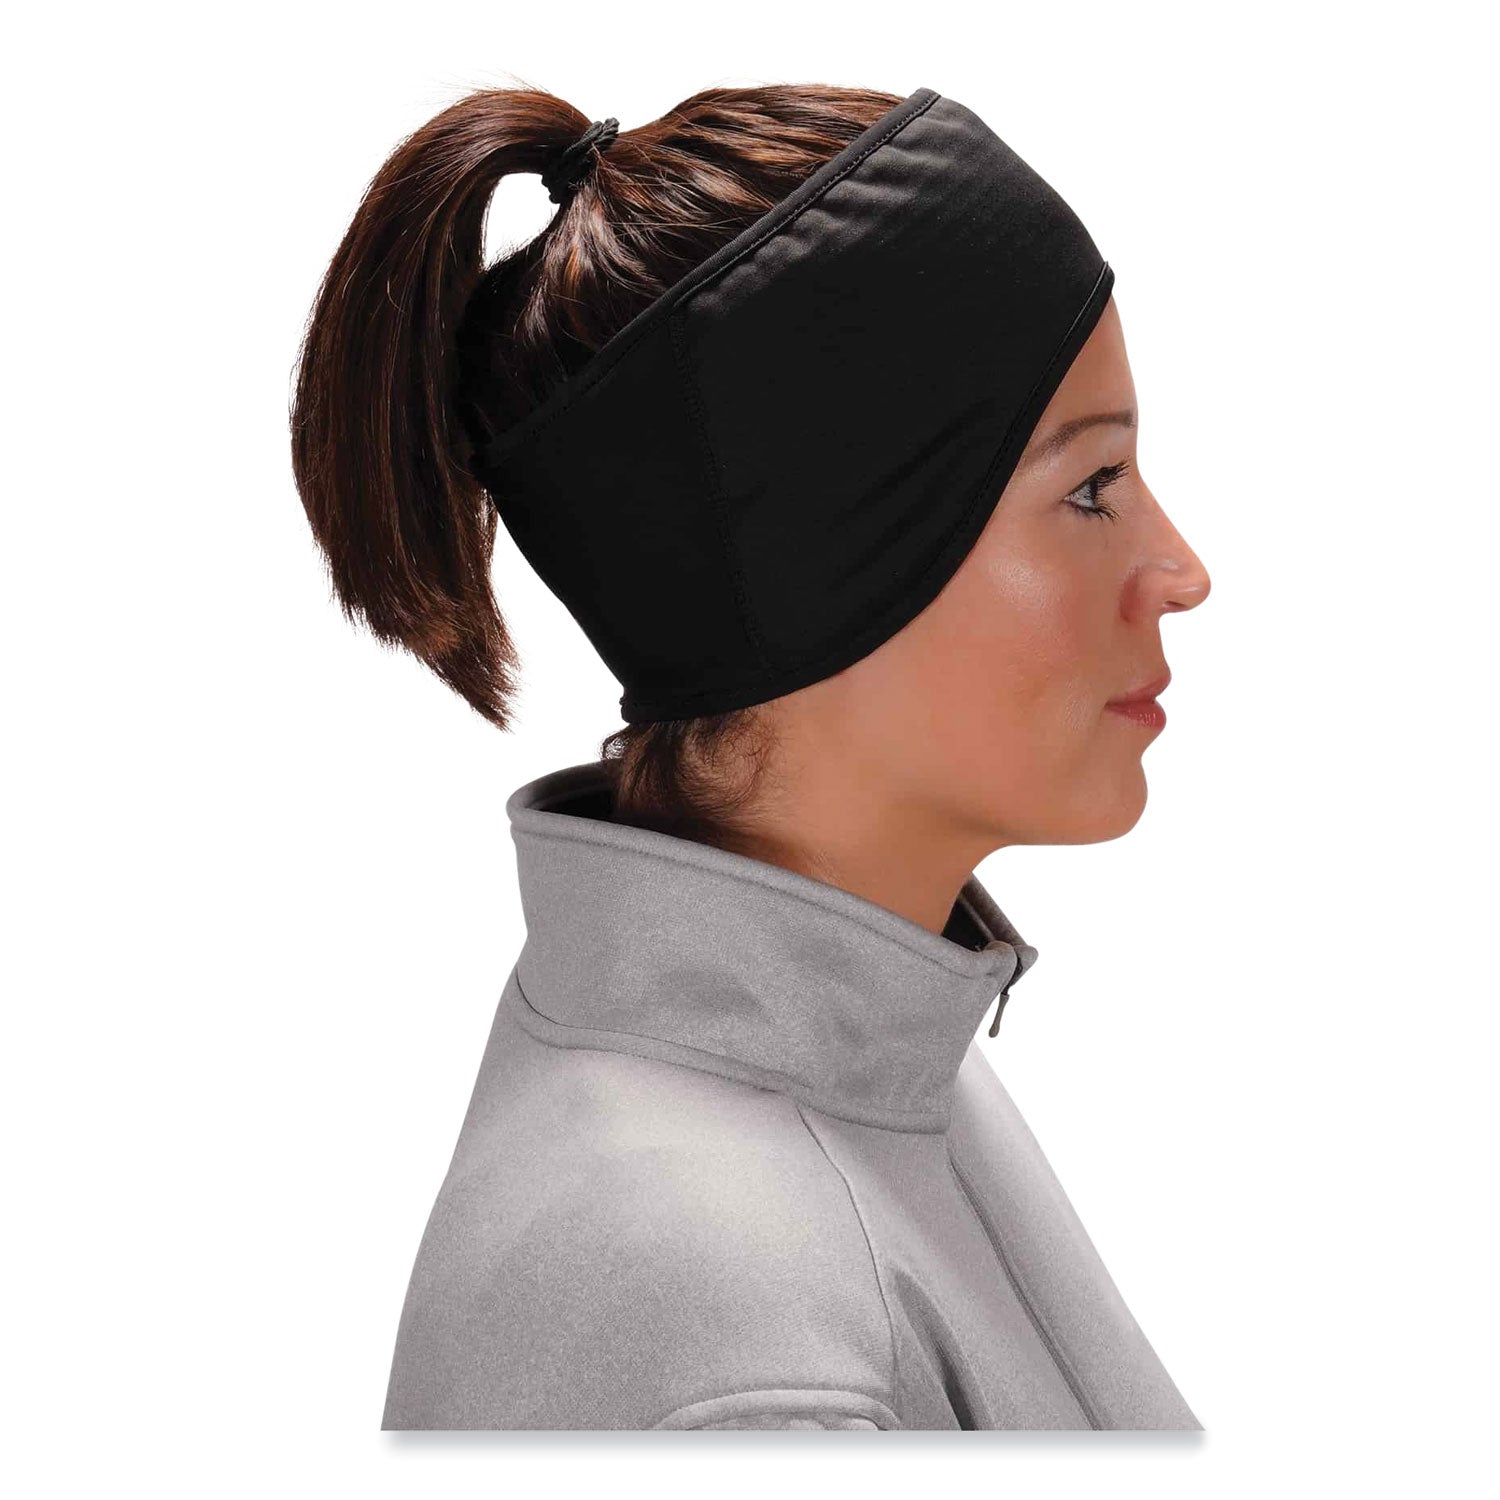 n-ferno-6887-2-layer-winter-headband-spandex-fleece-one-size-fits-most-black-ships-in-1-3-business-days_ego16887 - 2